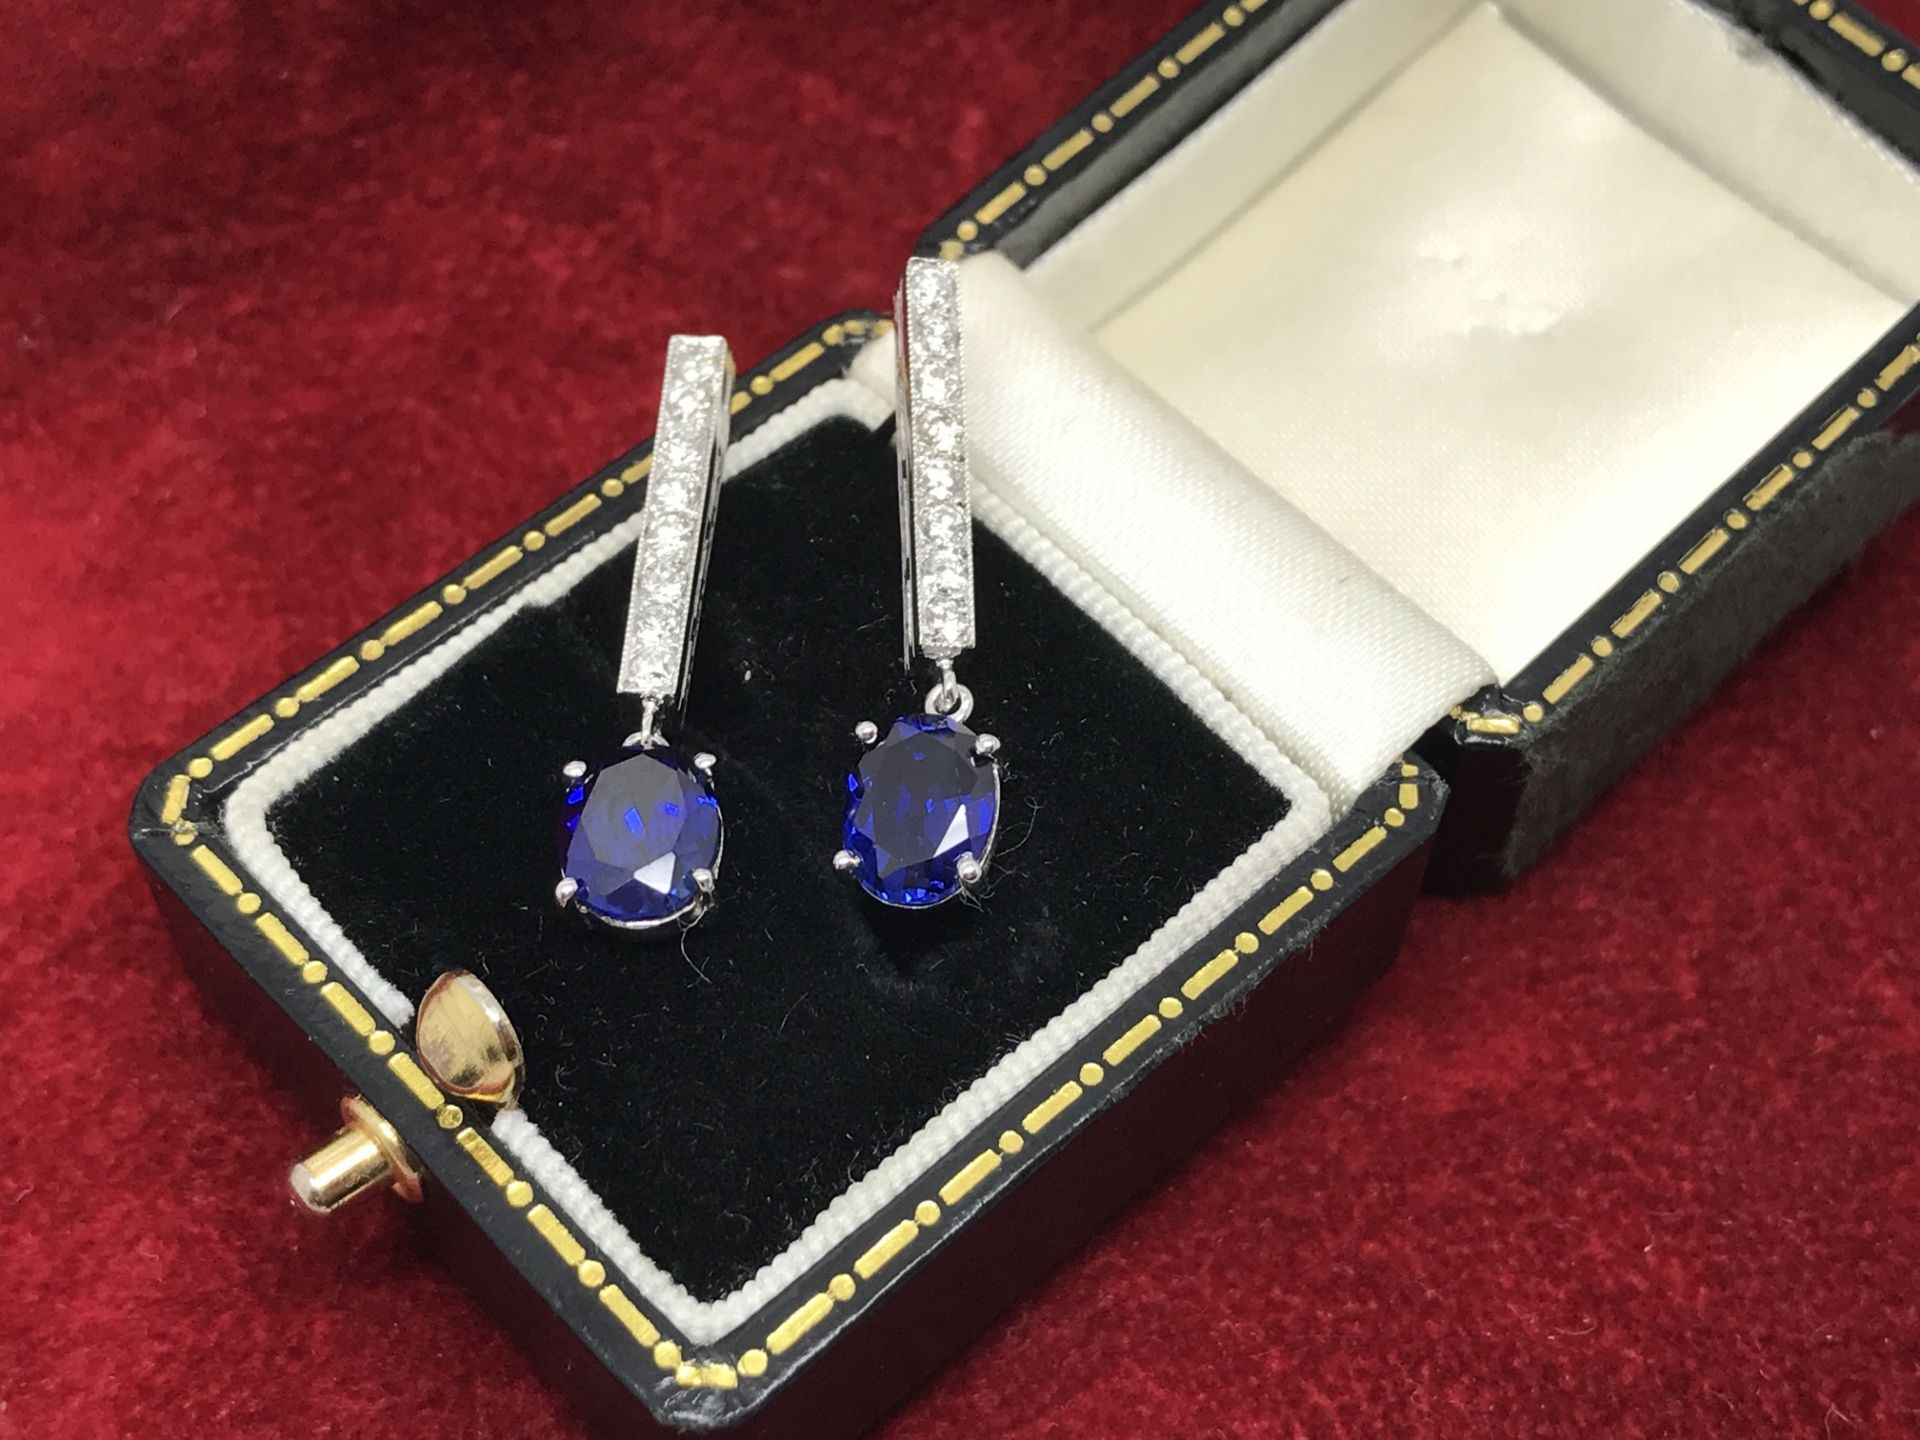 AMAZING SAPPHIRE & DIAMOND DROP EARRINGS SET IN WHITE METAL TESTED AS 18ct GOLD - Image 2 of 3